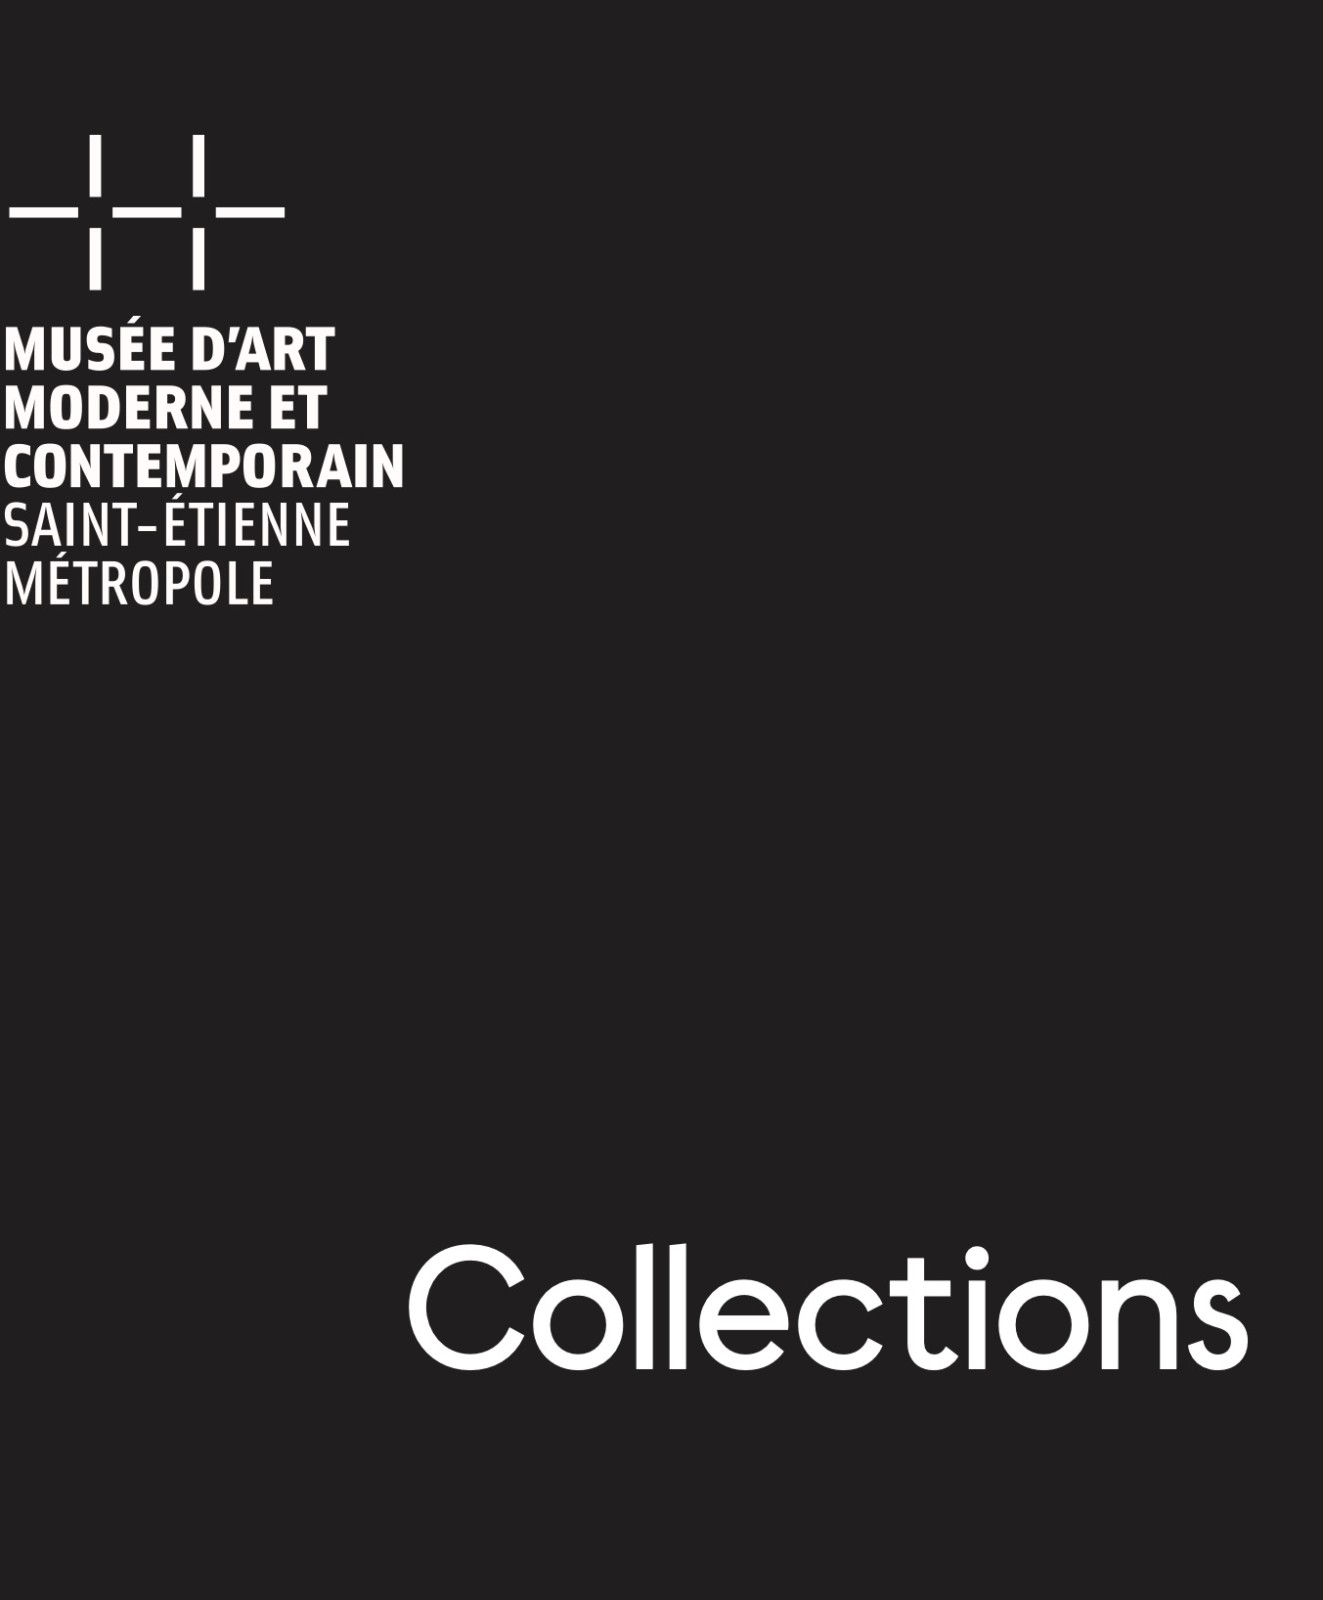 In Saint-Étienne, the rich collection of the MAMC+ image